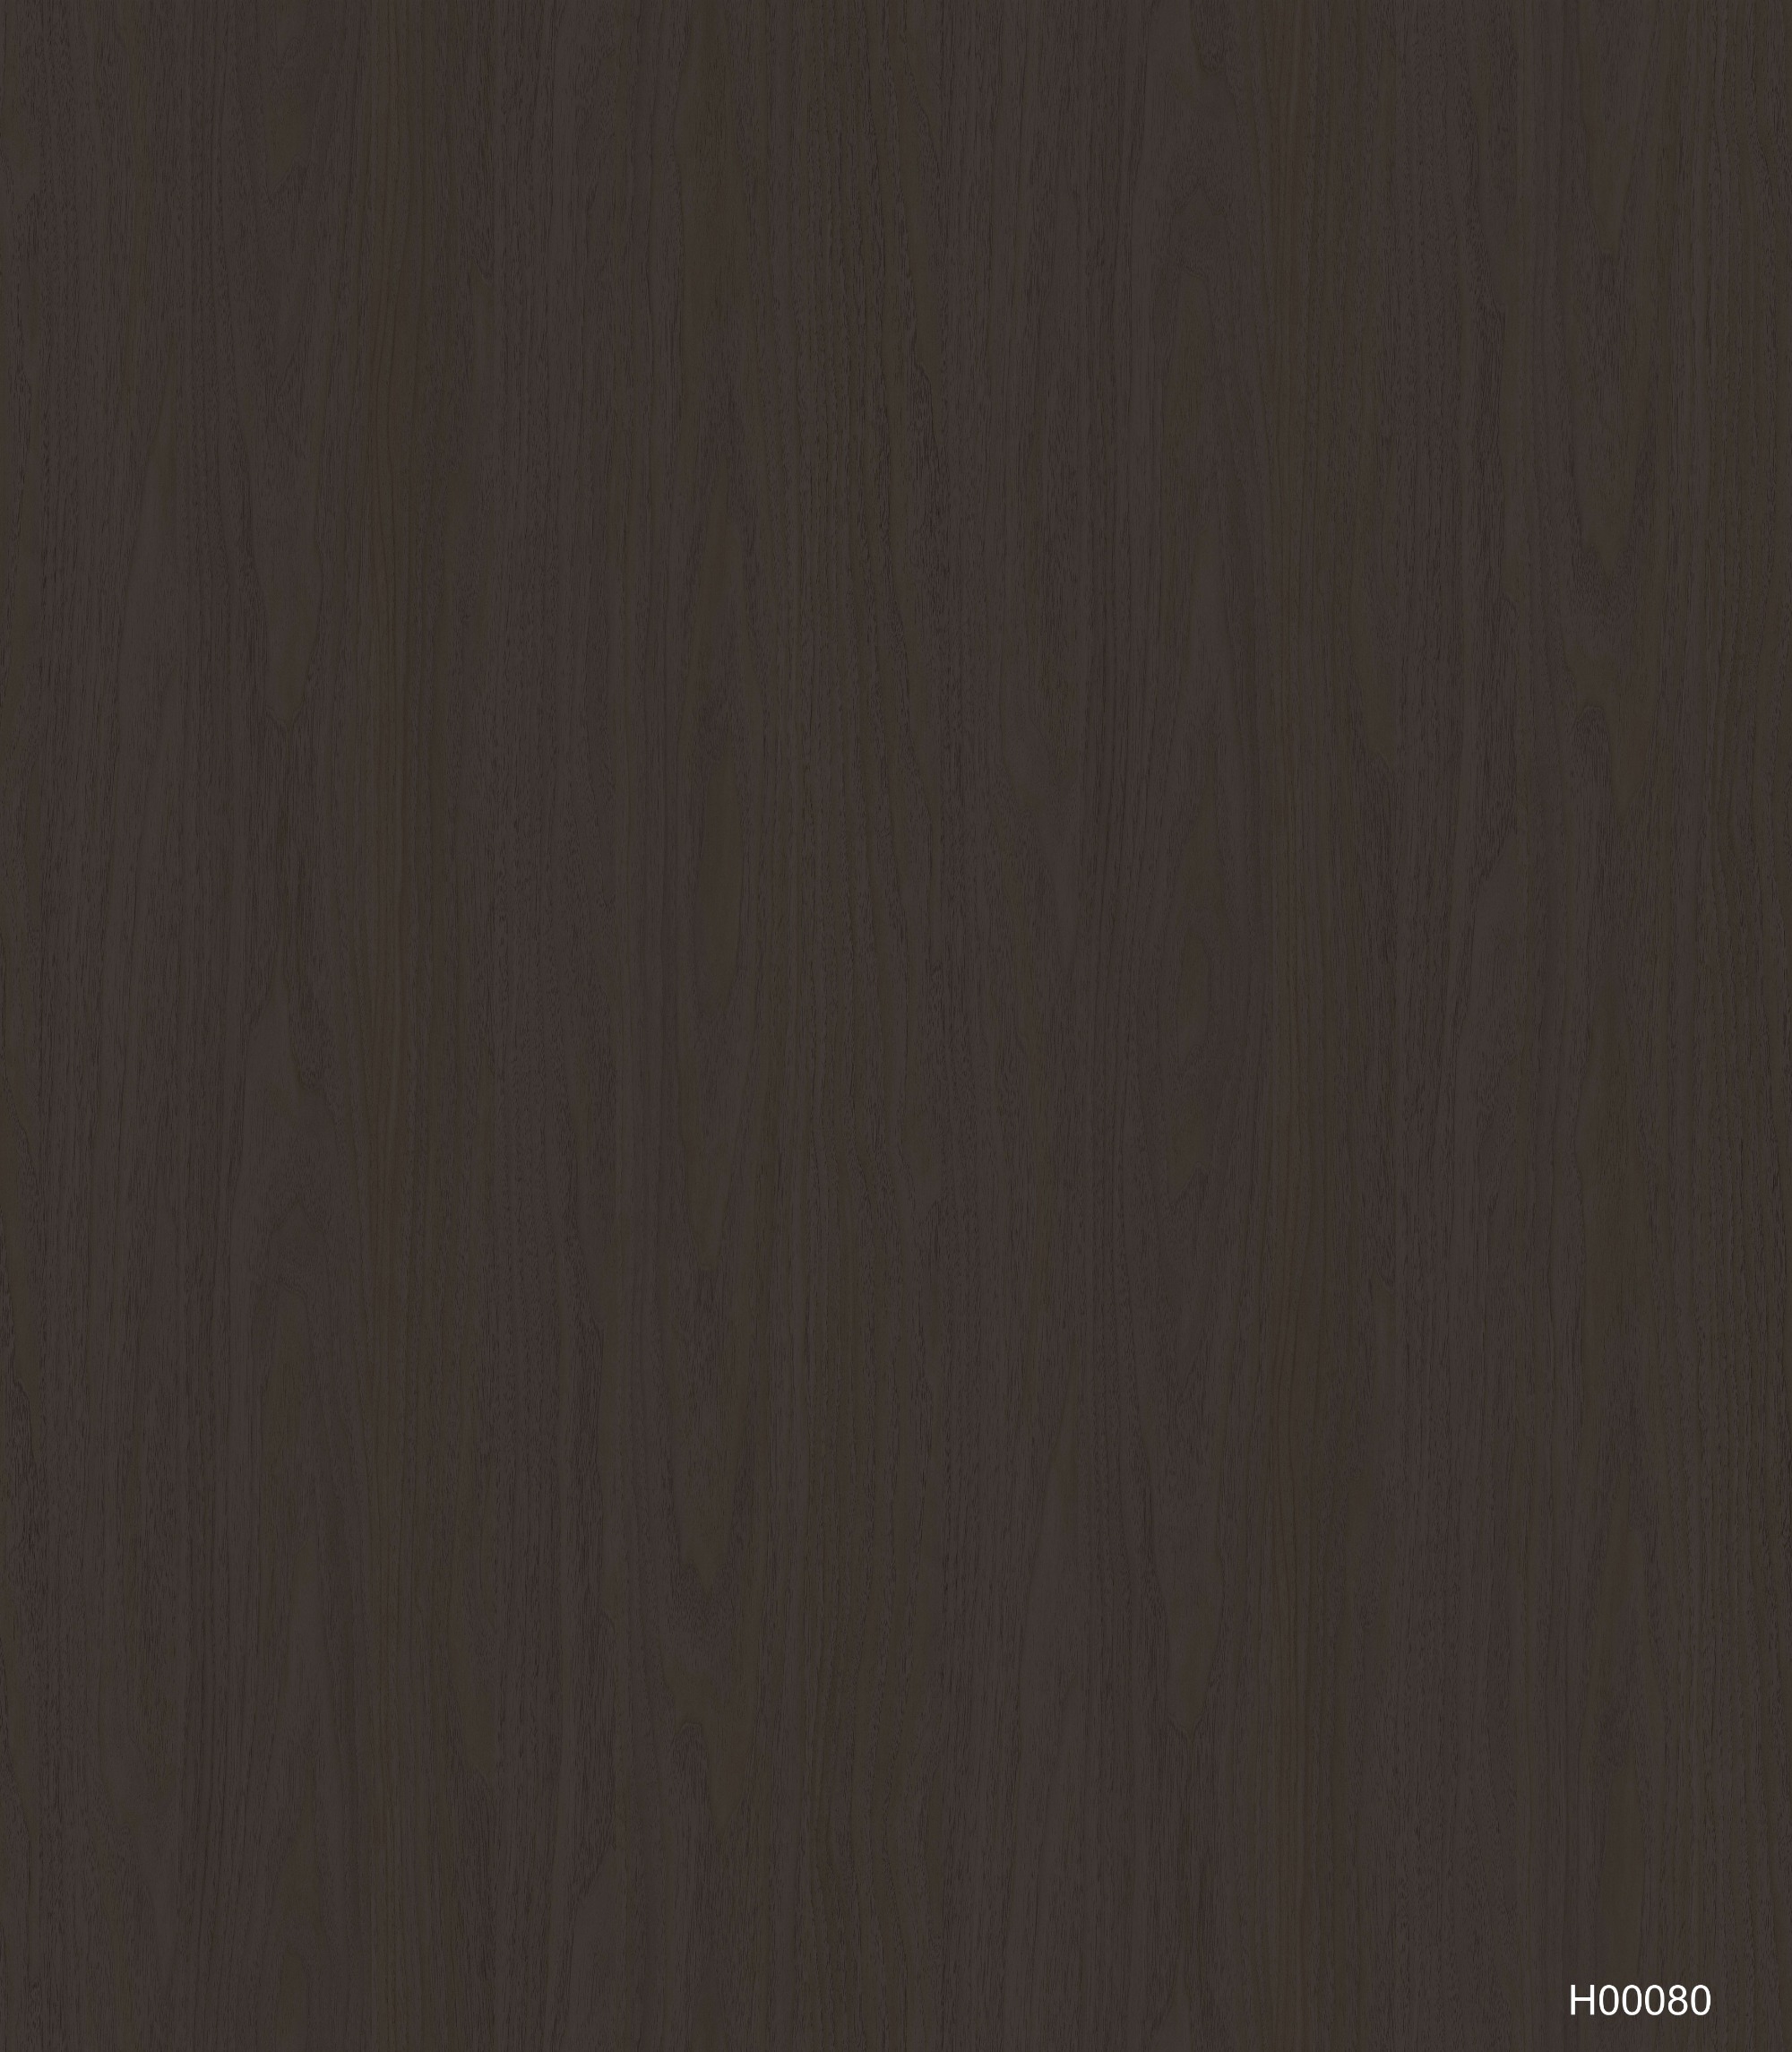 H00080 Melamine paper with wood grain